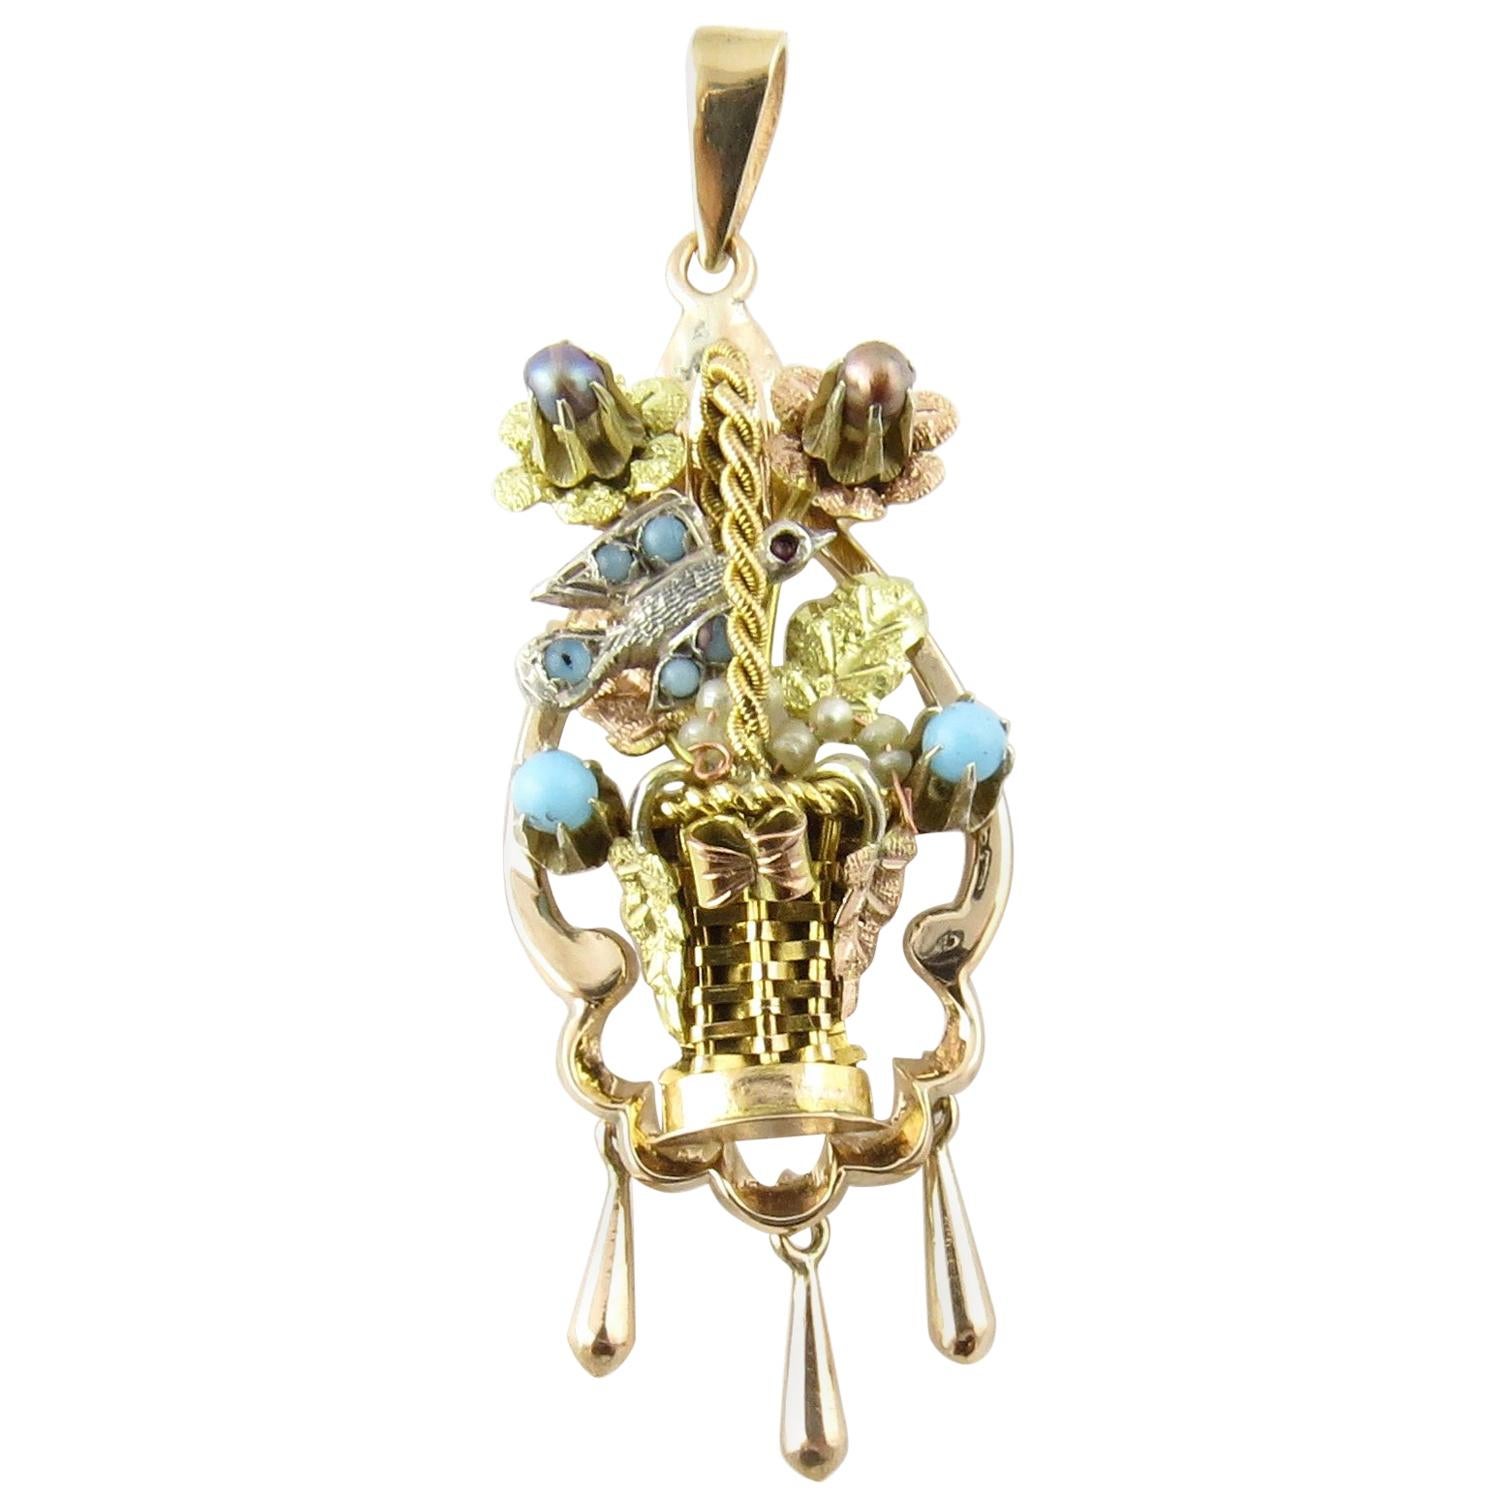 10 Karat Tricolor Gold and Silver Handmade Pendant For Sale